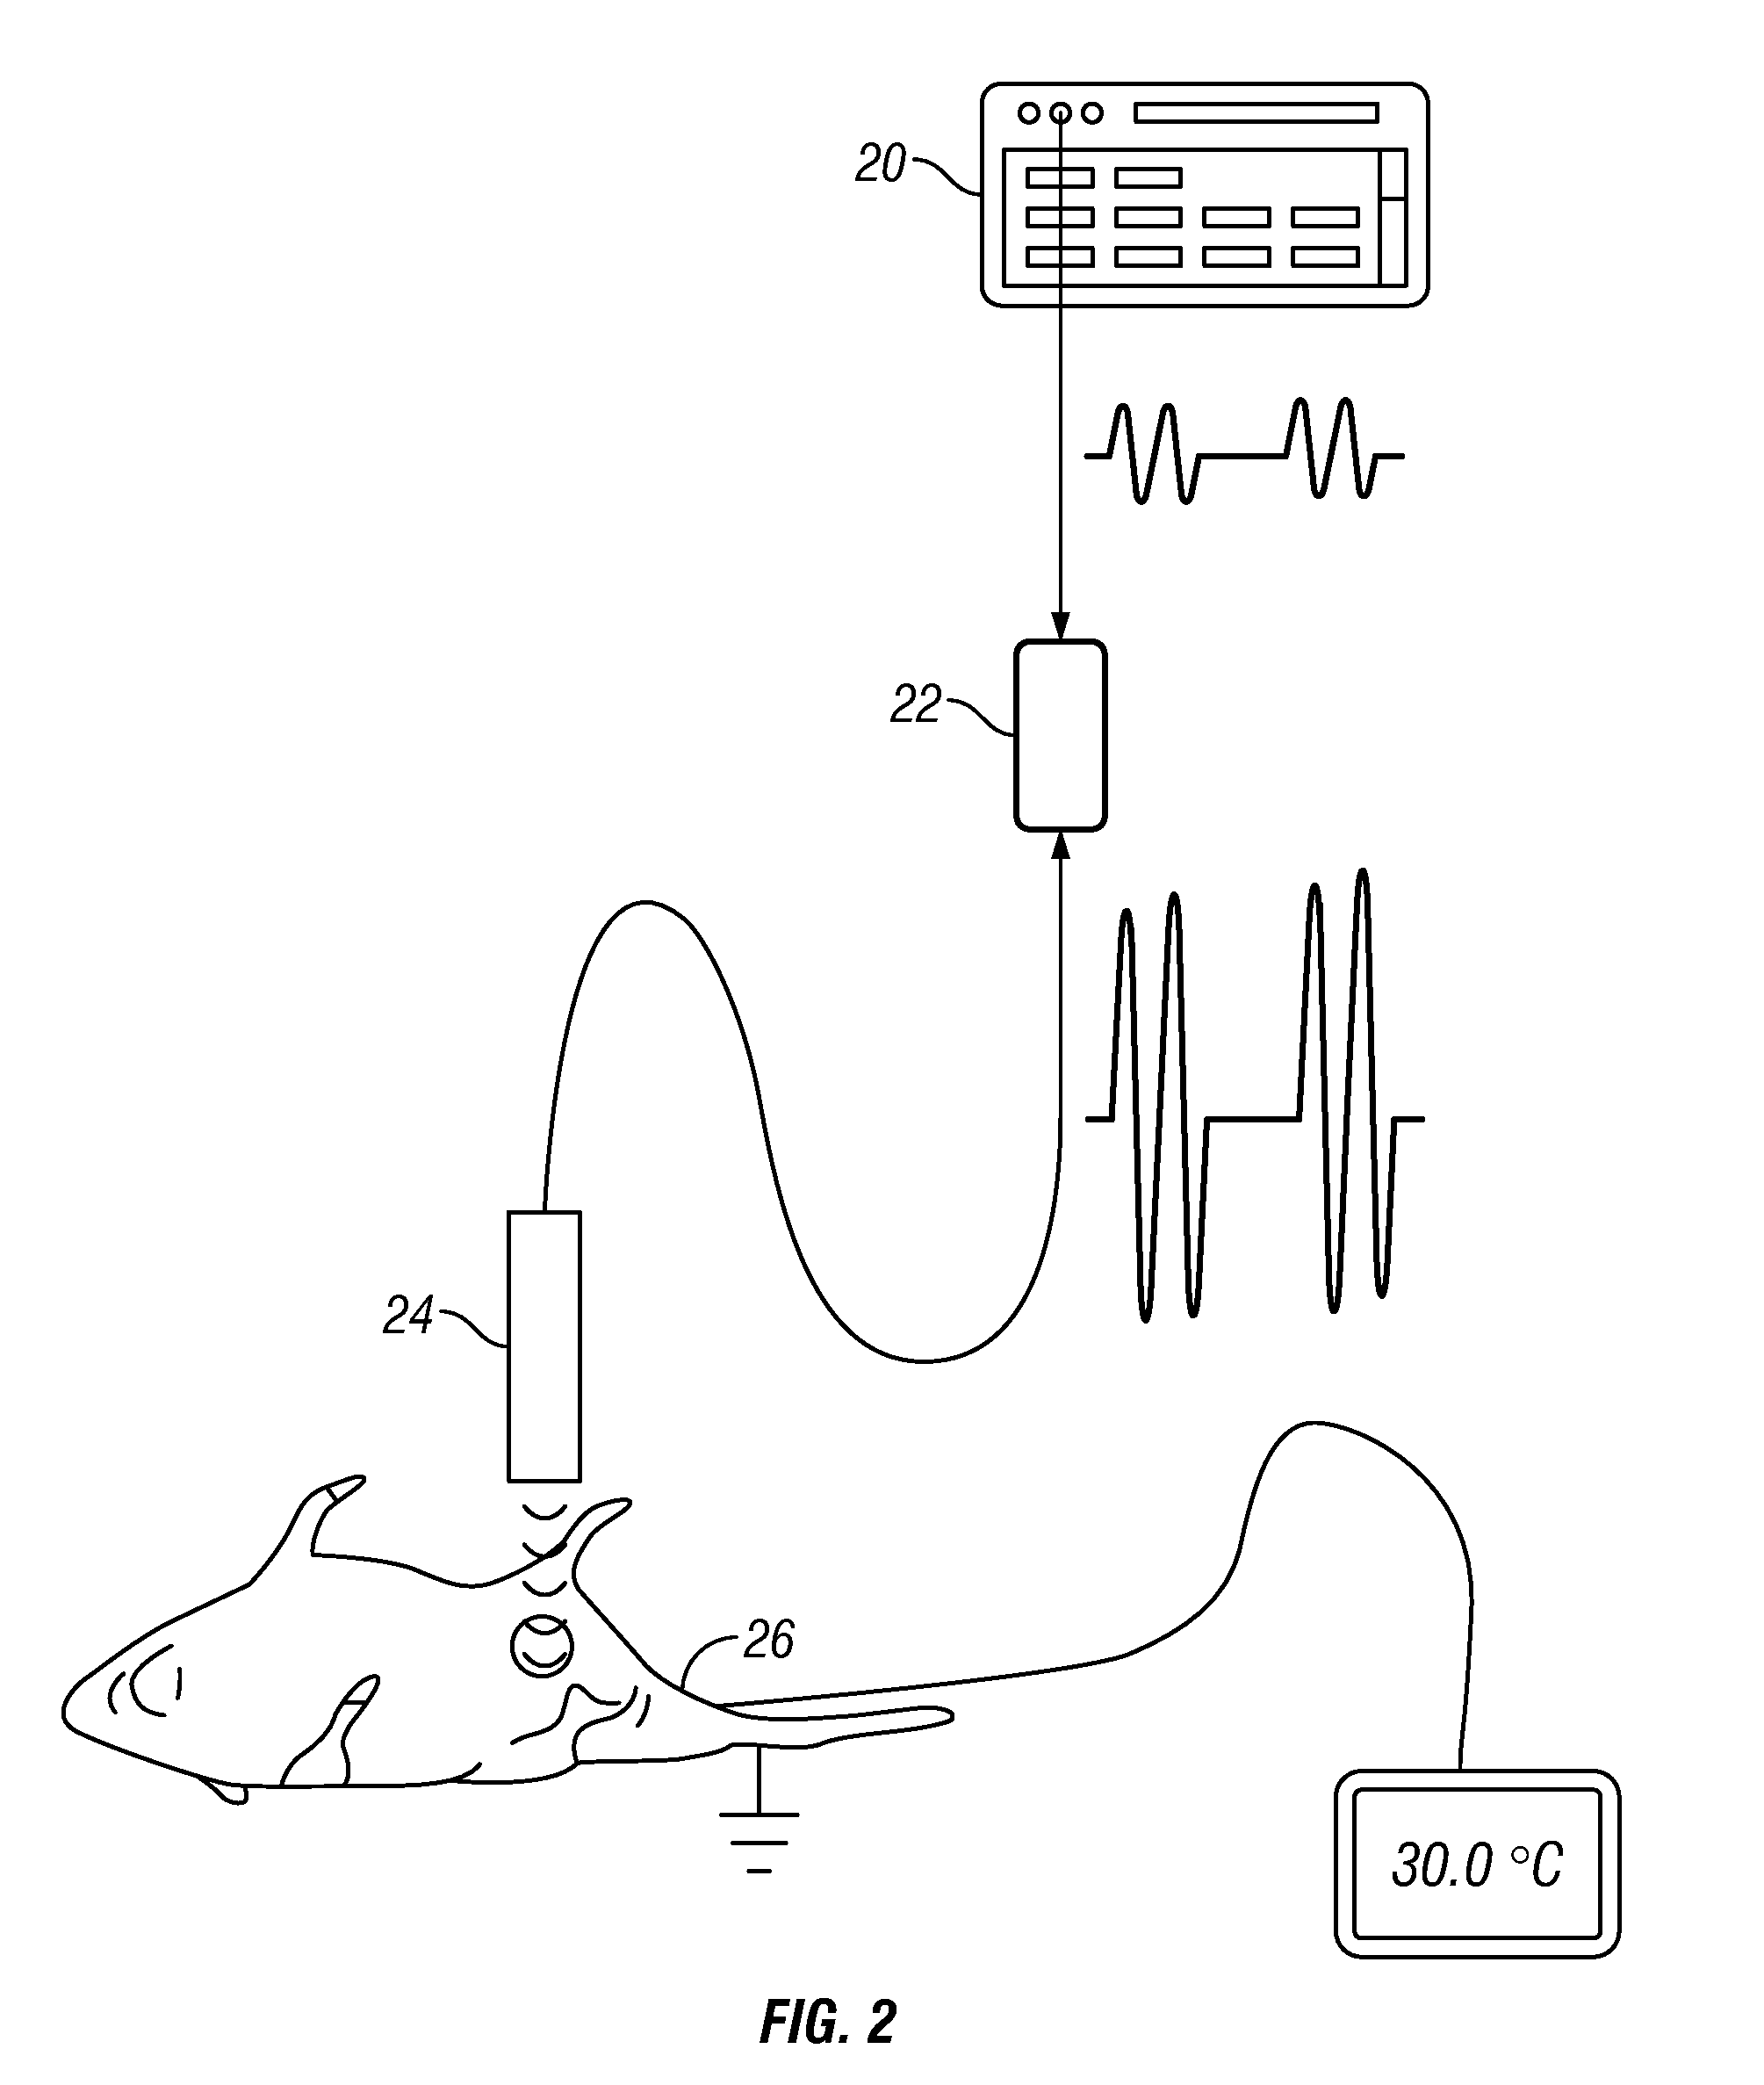 Methods and Apparatus for Treating a Cervix with Ultrasound Energy